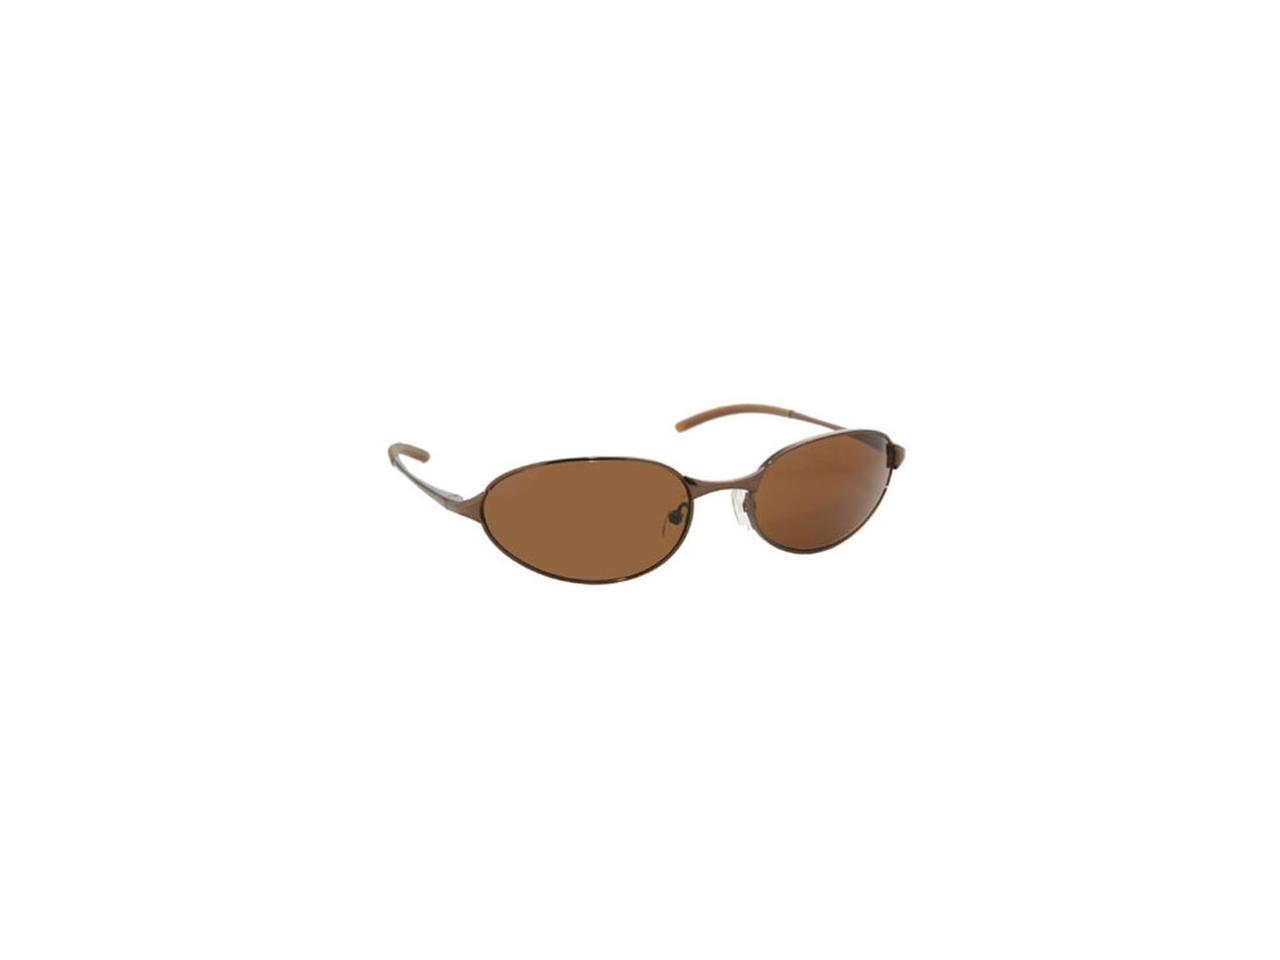 Picture of Coppermax 3709GPP BRN/AMBER Tonga Oval Polarized Sunglasses - Shiny Brown - Amber Lens